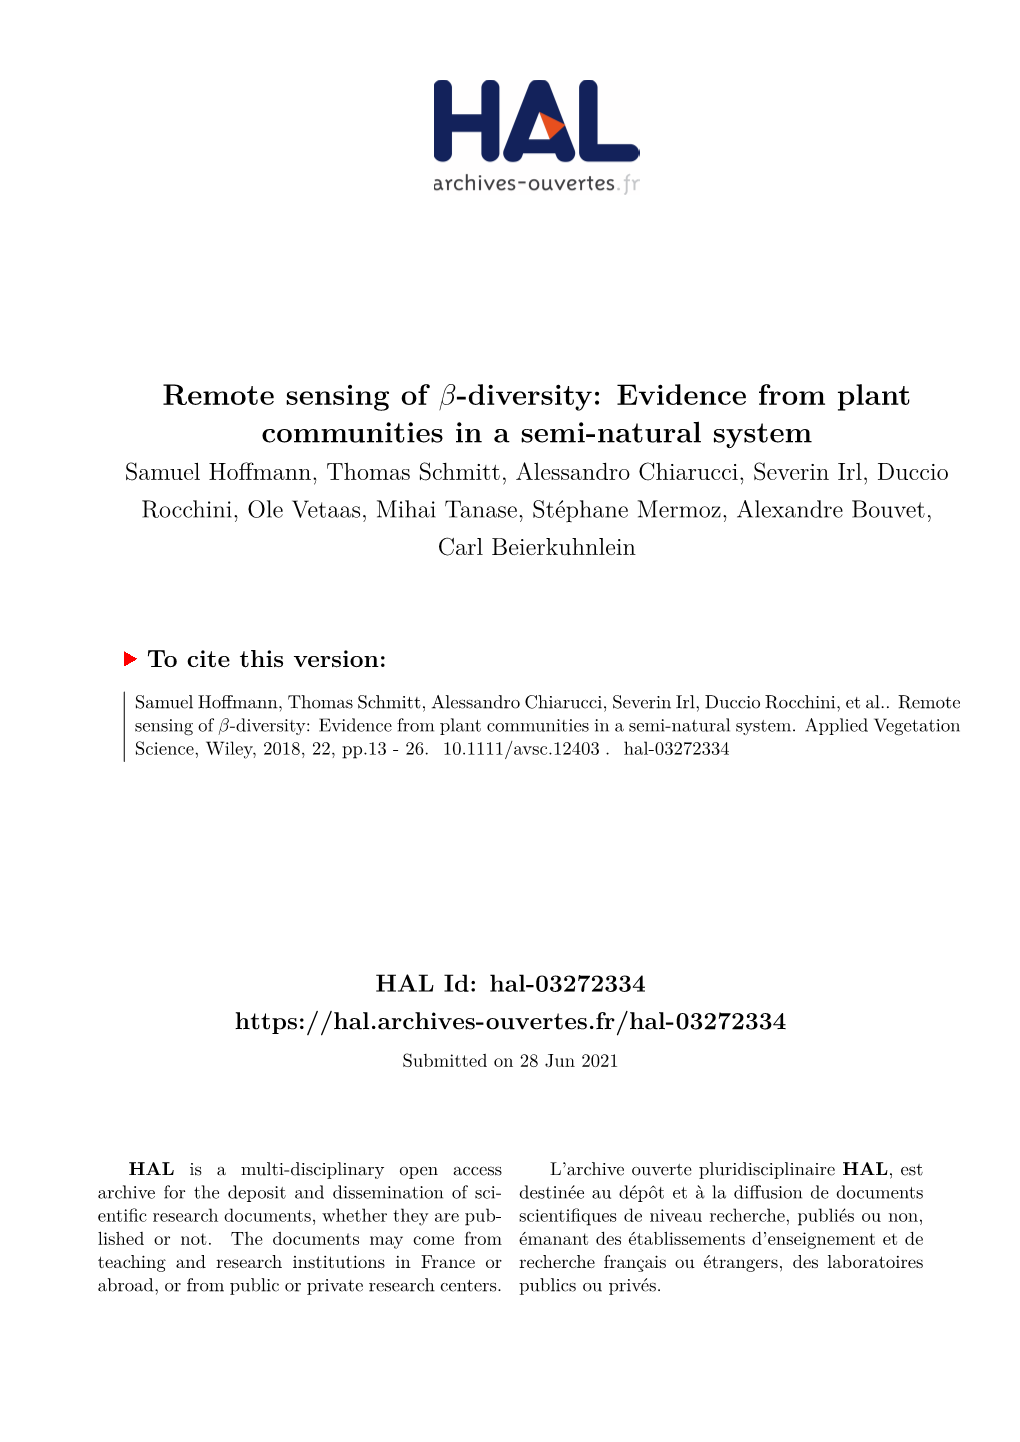 Remote Sensing of -Diversity: Evidence from Plant Communities in a Semi-Natural System